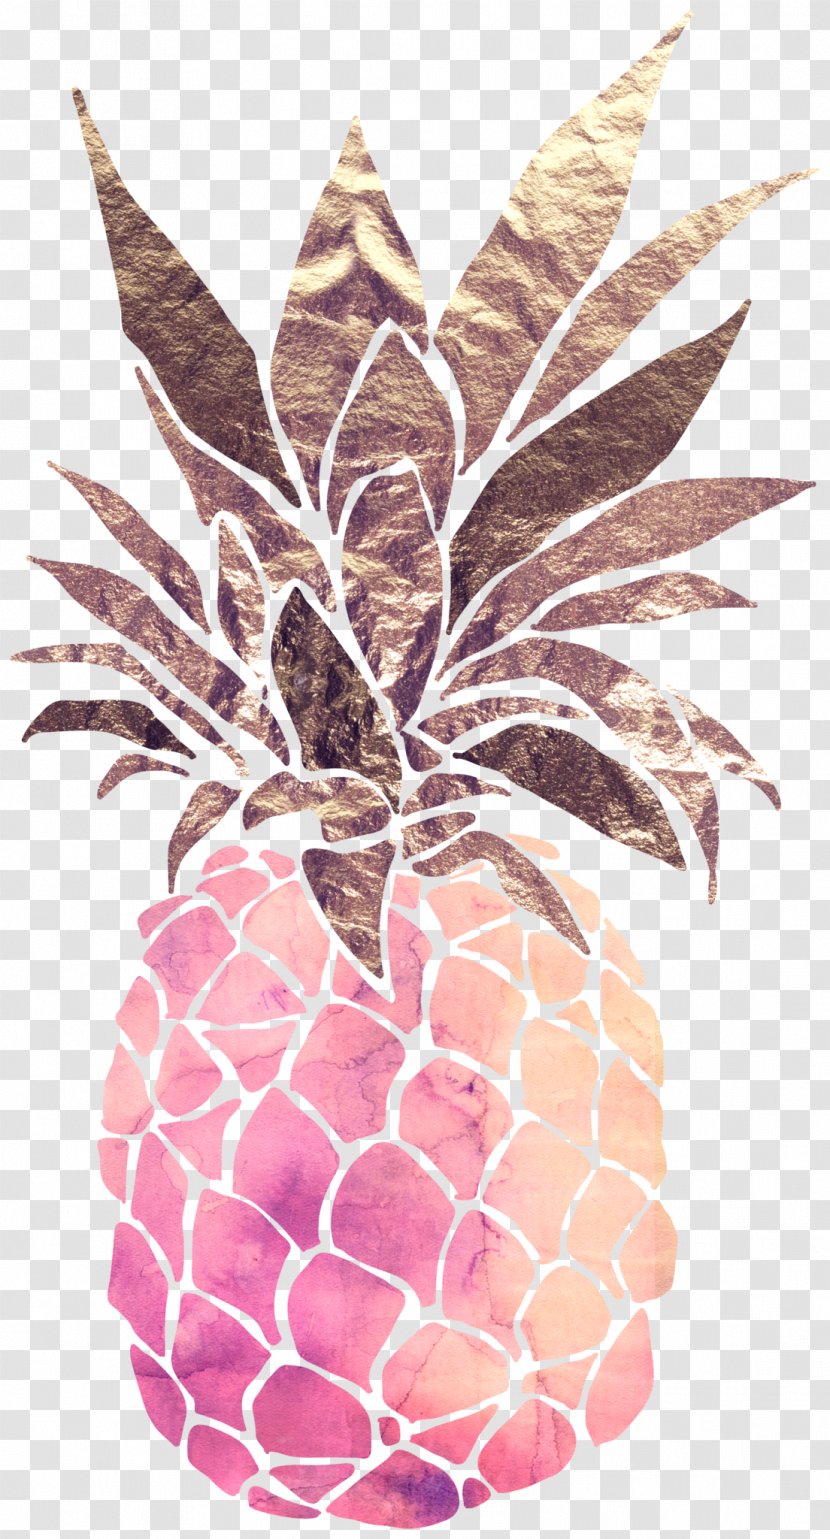 Pineapple Upside-down Cake Watercolor Painting Drawing Clip Art Transparent PNG